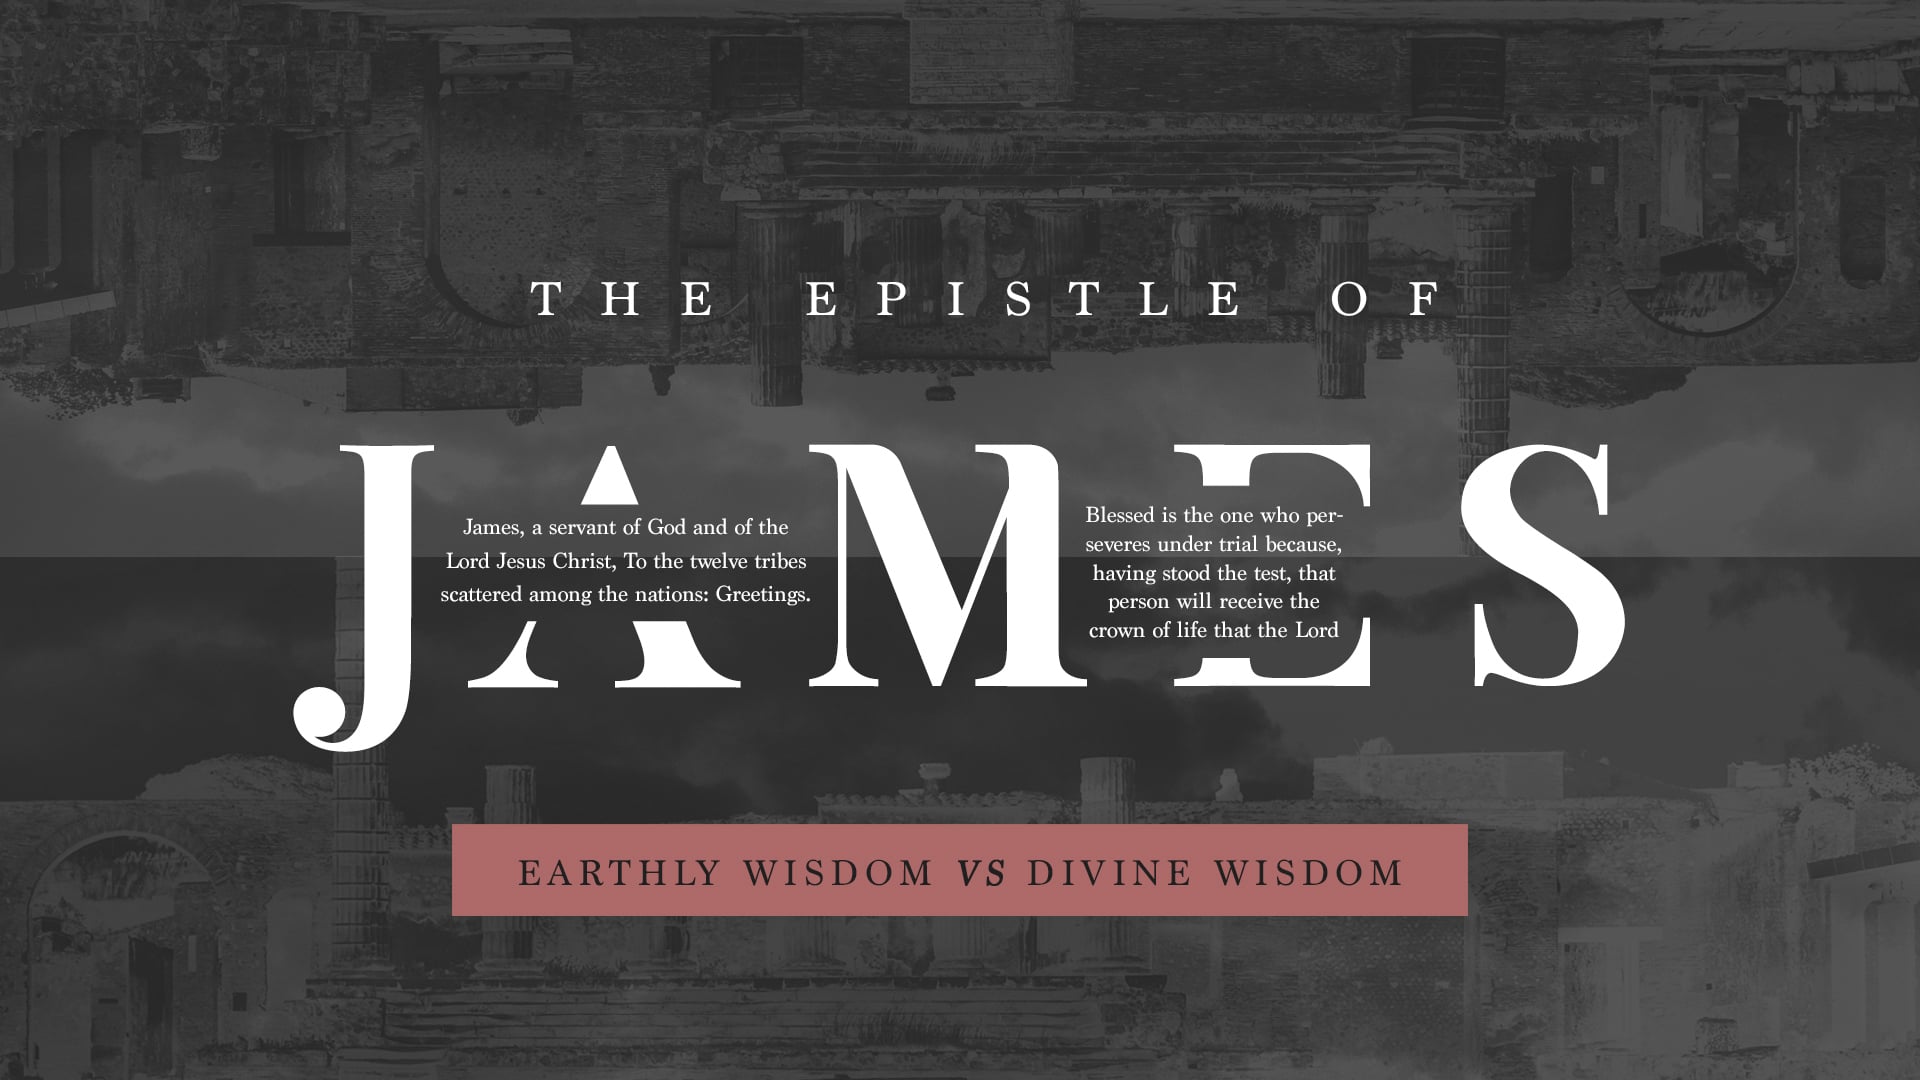 The Epistle of James: Introduction